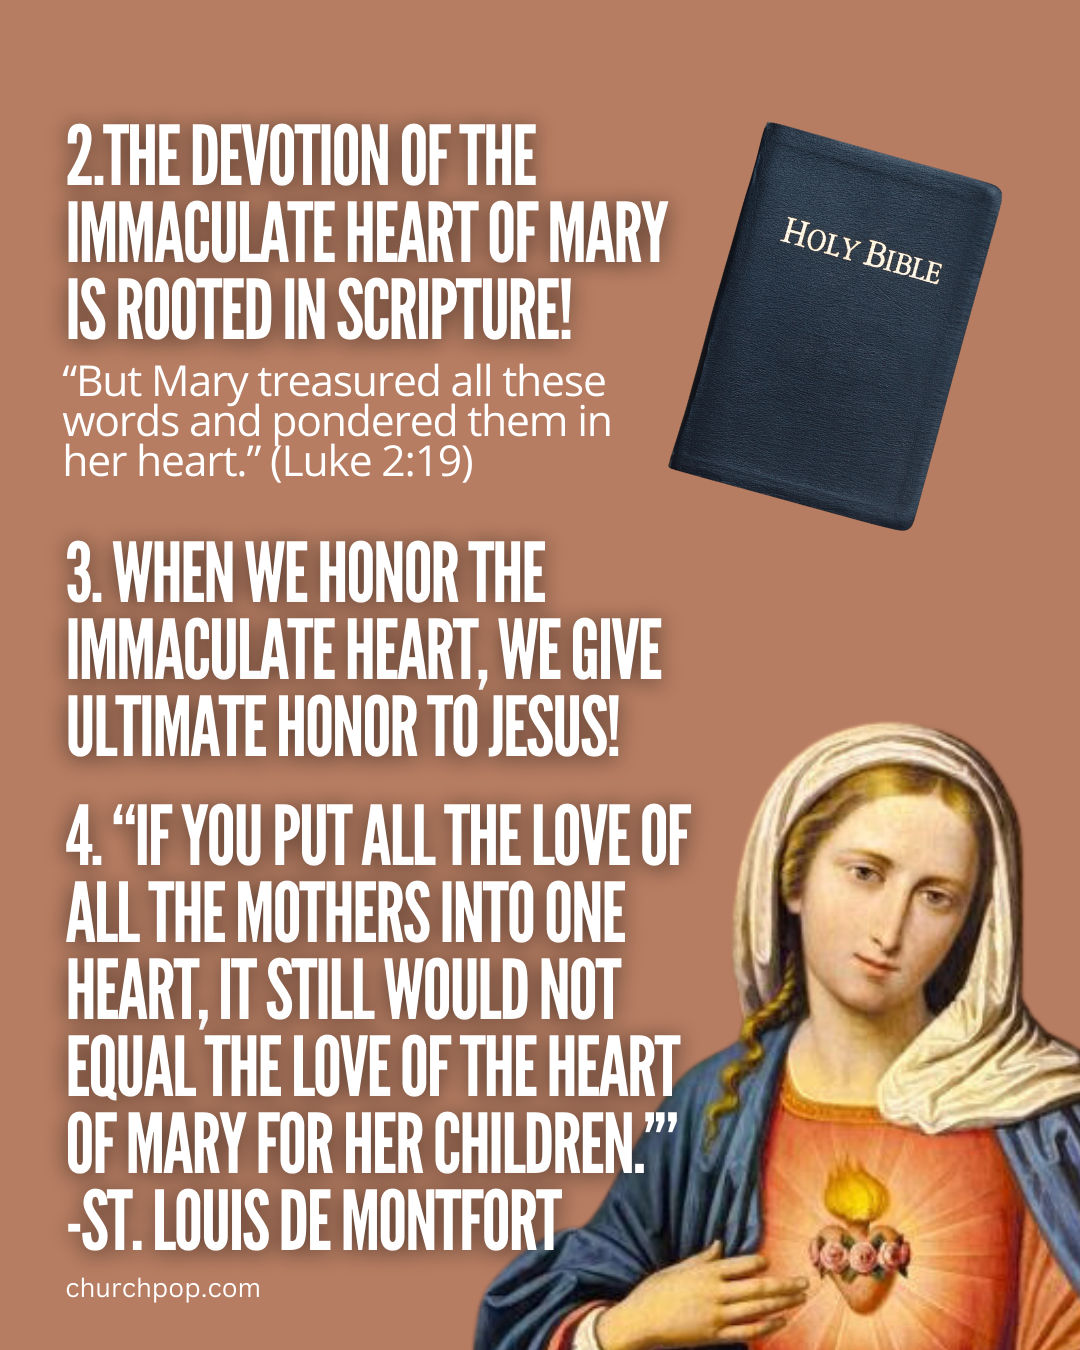 What is the immaculate heart of mary catholic?